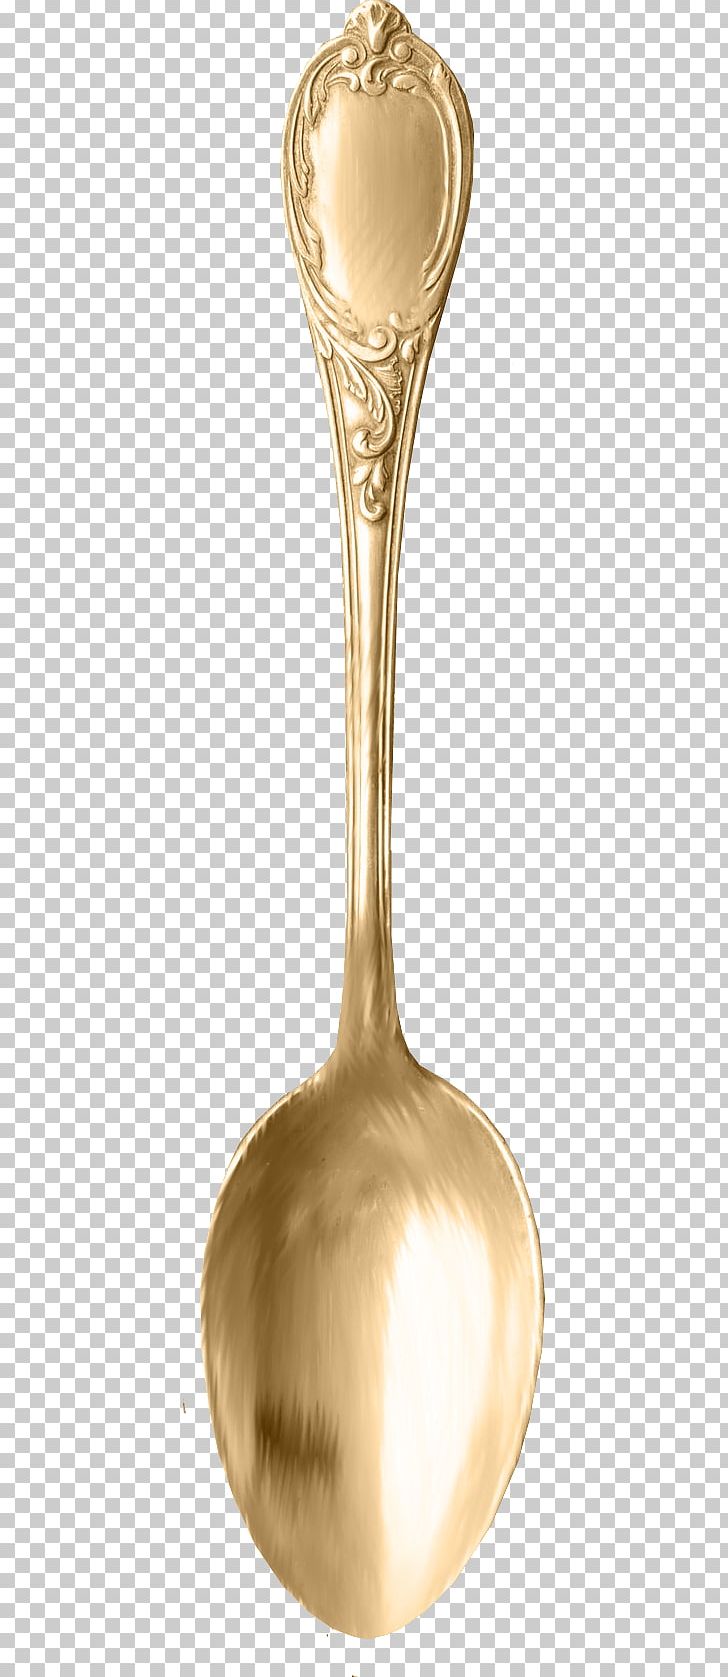 Spoon Material Metal Brass PNG, Clipart, Beautiful, Beauty, Beauty Salon, Brass, Brown Free PNG Download